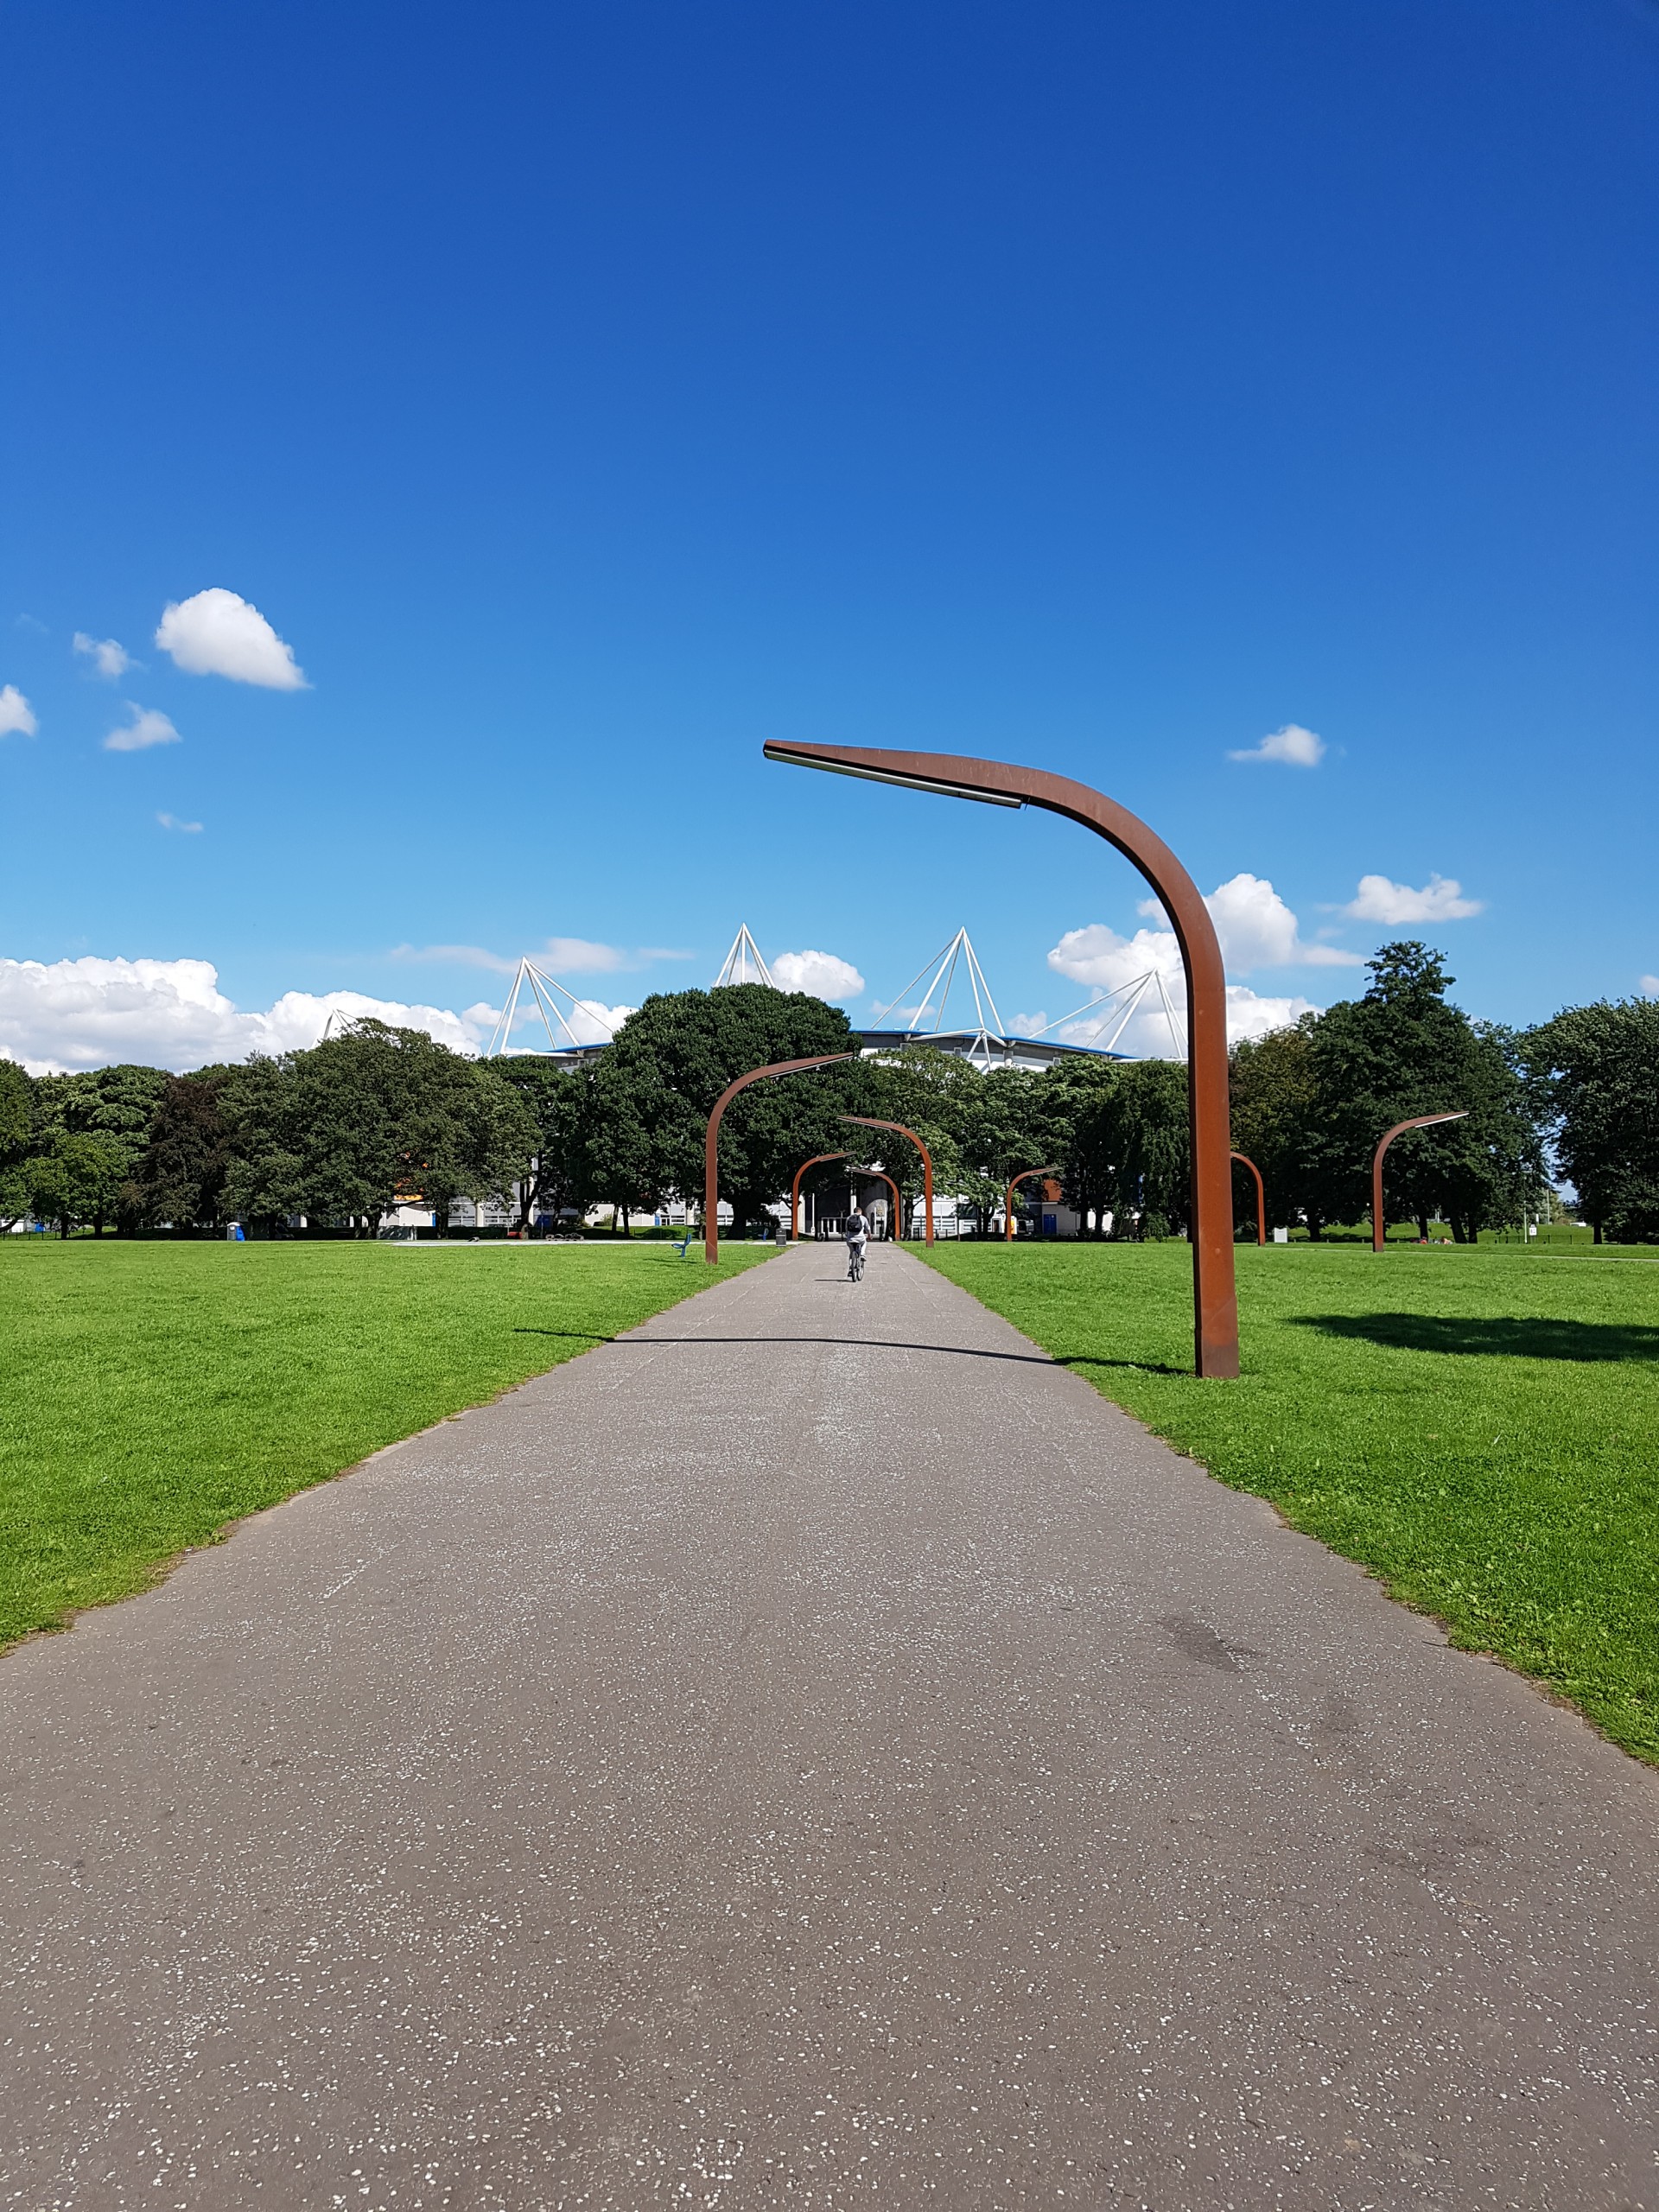 The WalkHull project is based in West Park